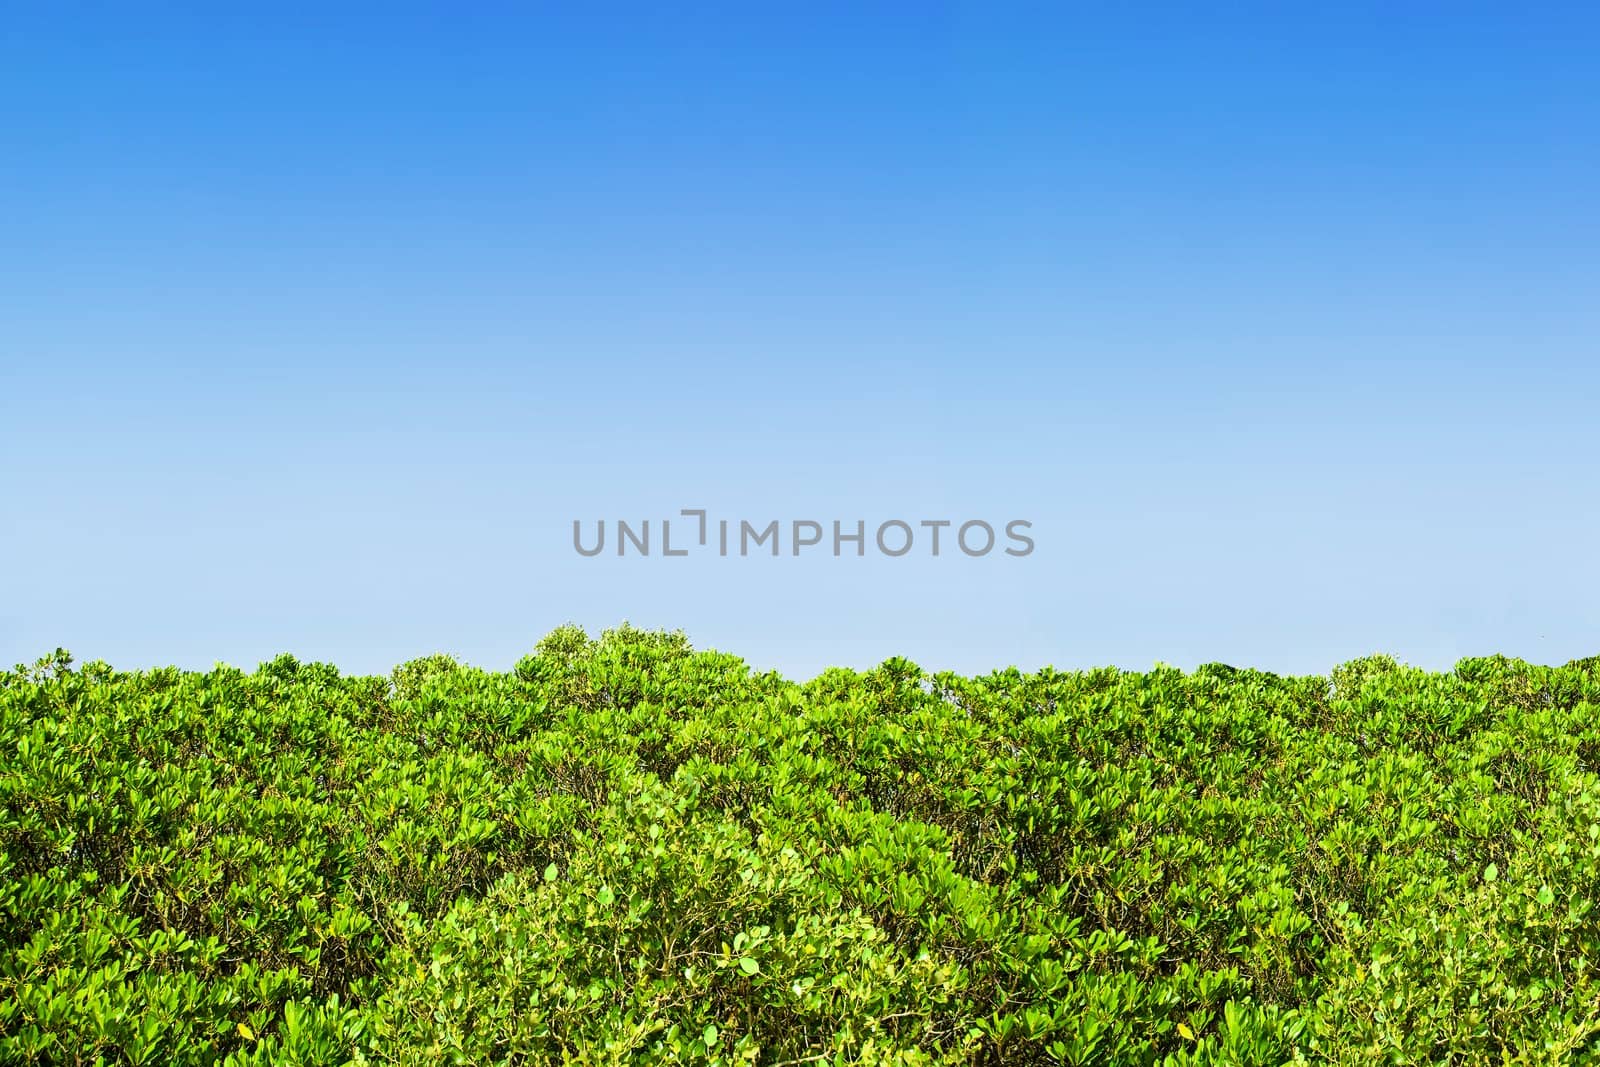 juicy green hedge row in front of a perfect blue sky ...well actually its the upper part of a mangrove forest but it looks pretty much like a hedge to me ;) 